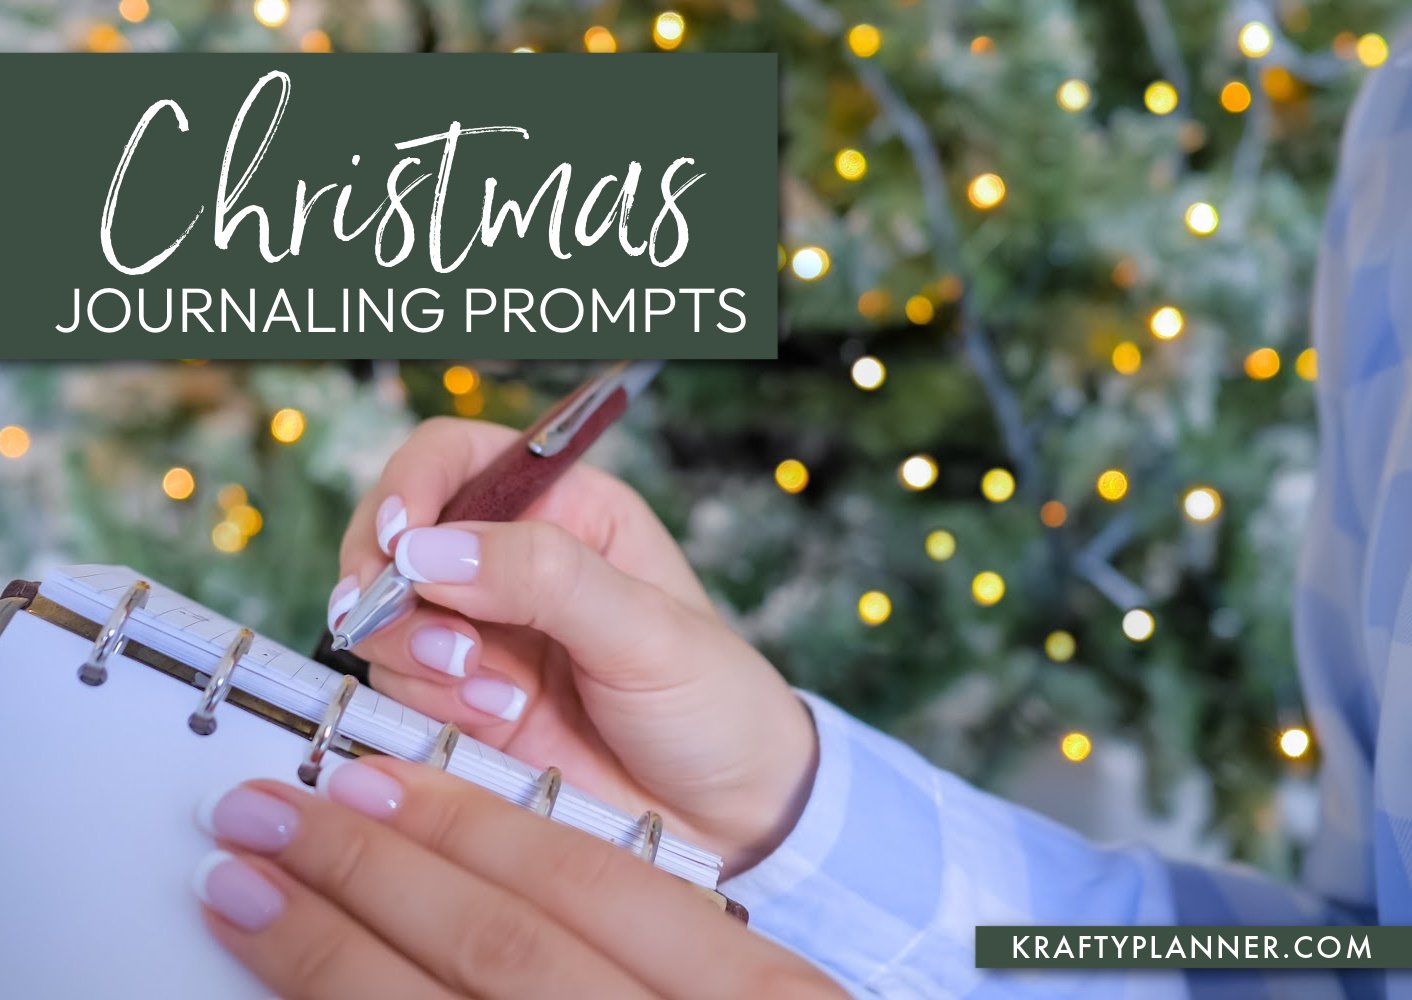 Christmas Journaling Prompts - 31 Prompts for the Holiday Season